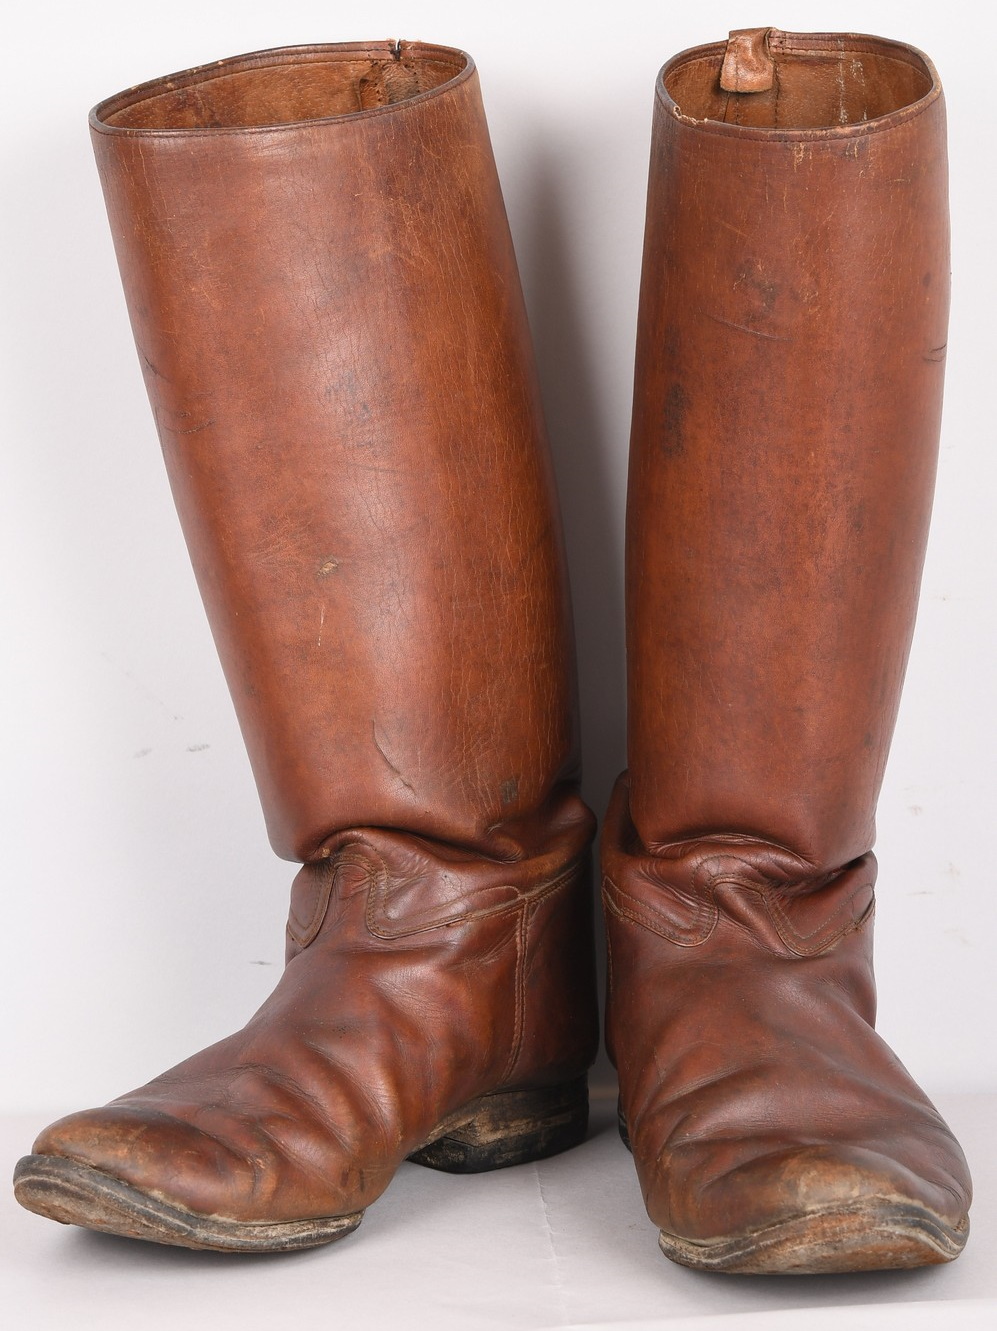 Japanese WWII Army Officer's Long Shaft Leather Boots